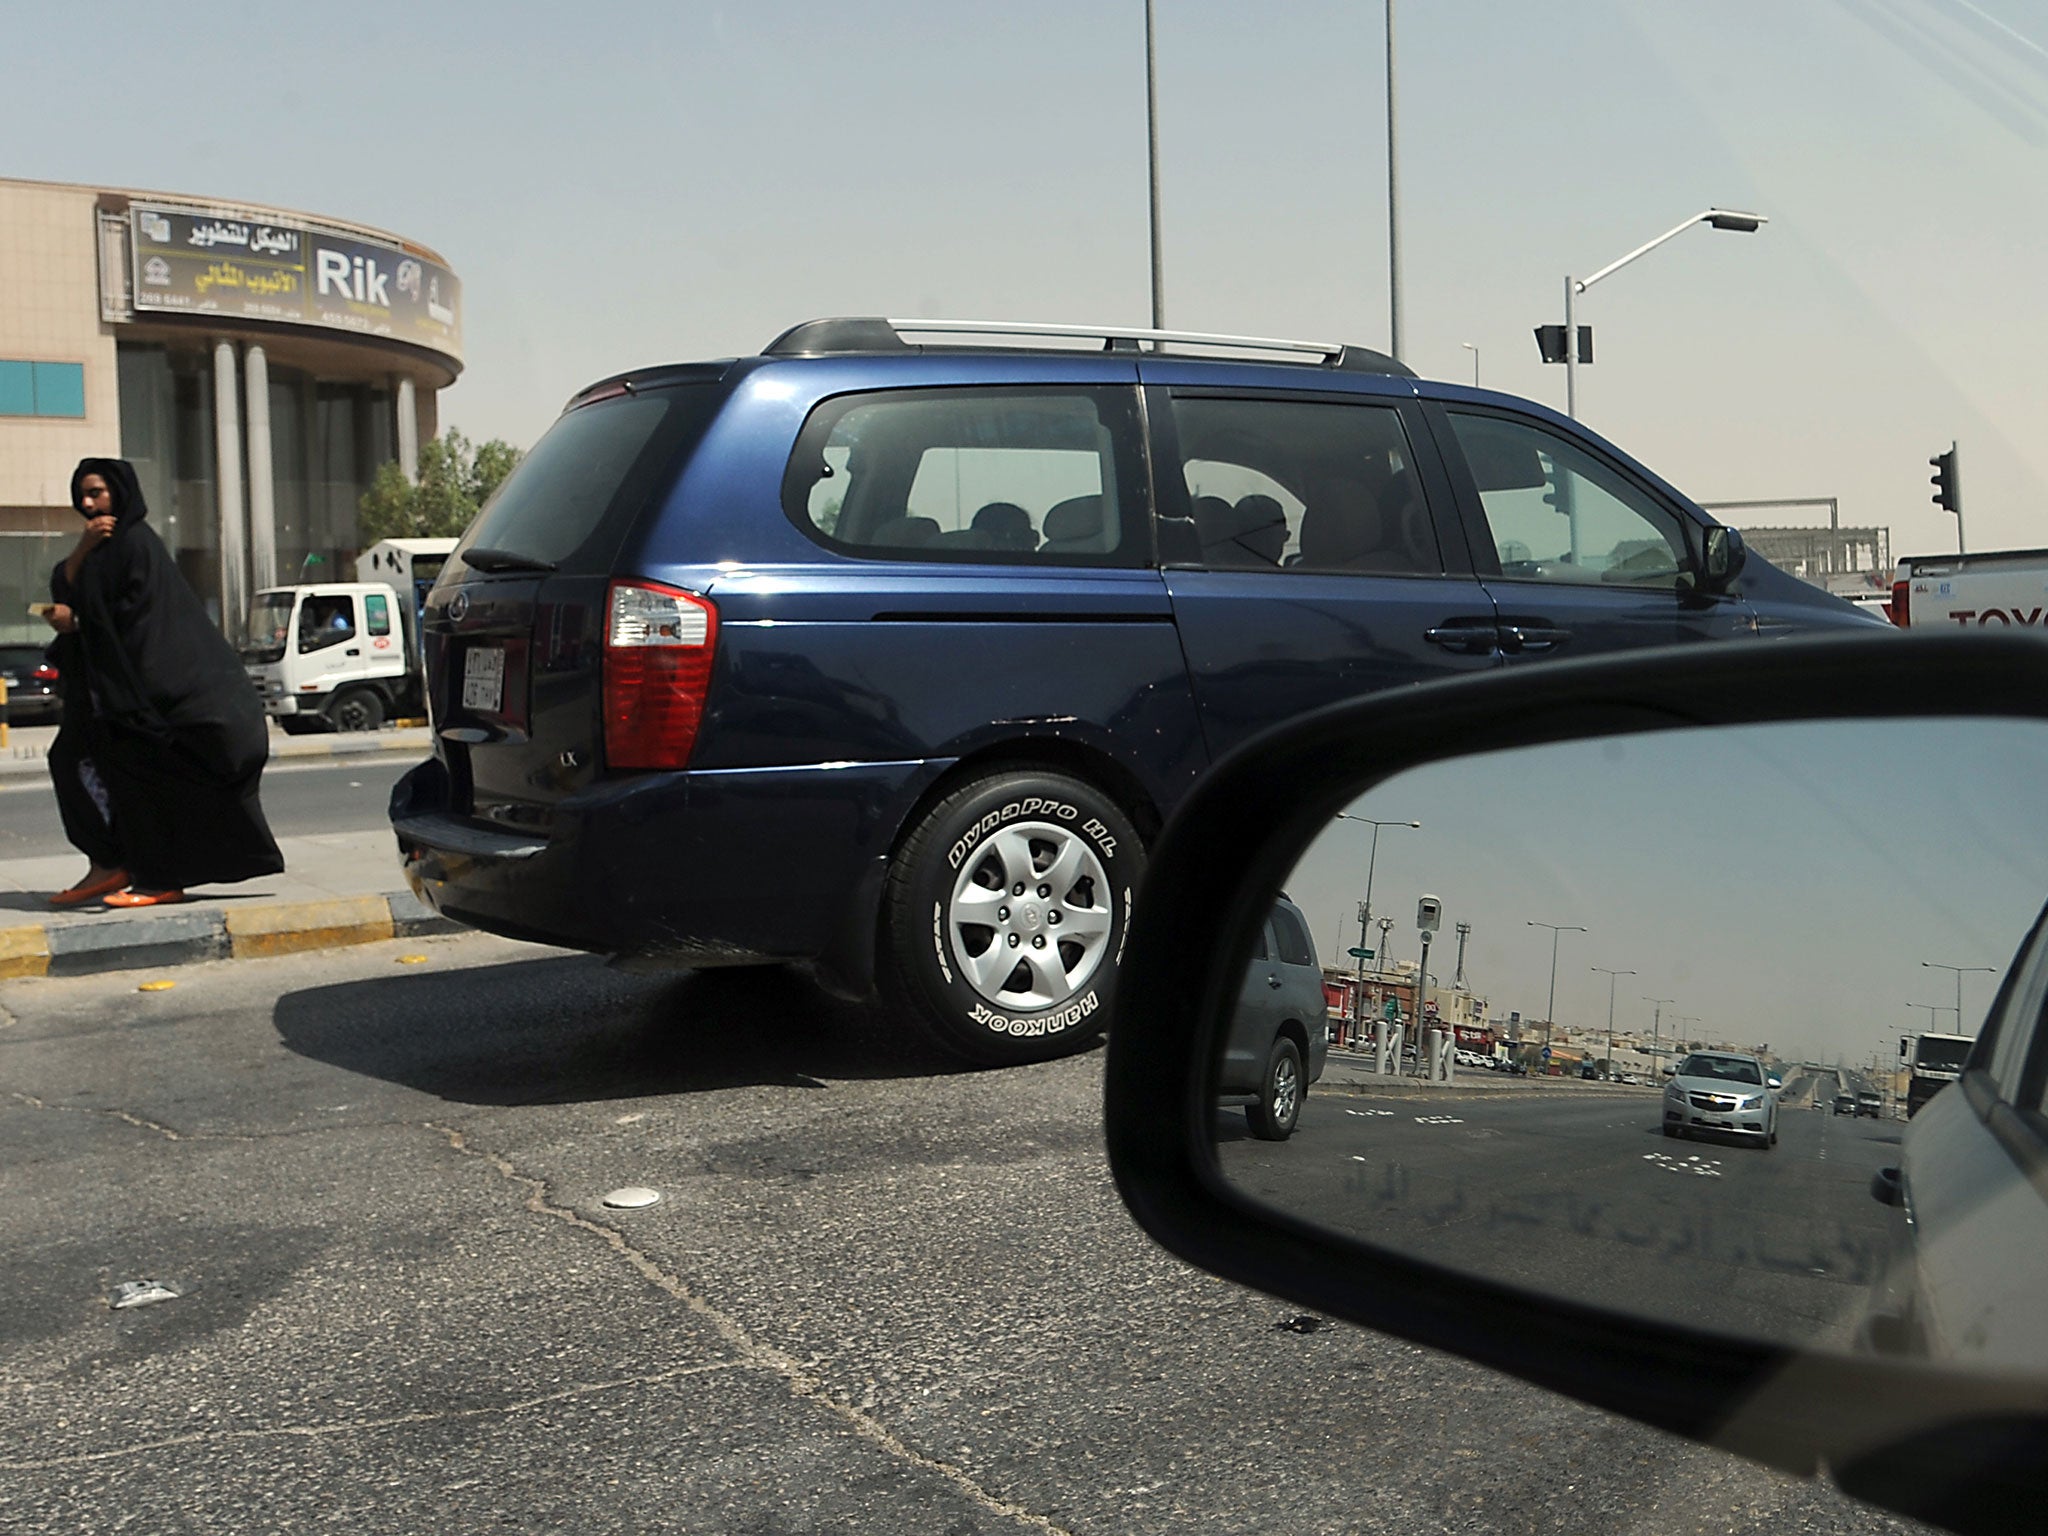 A Saudi woman, unrelated to the incident, walks past stopping vehicles